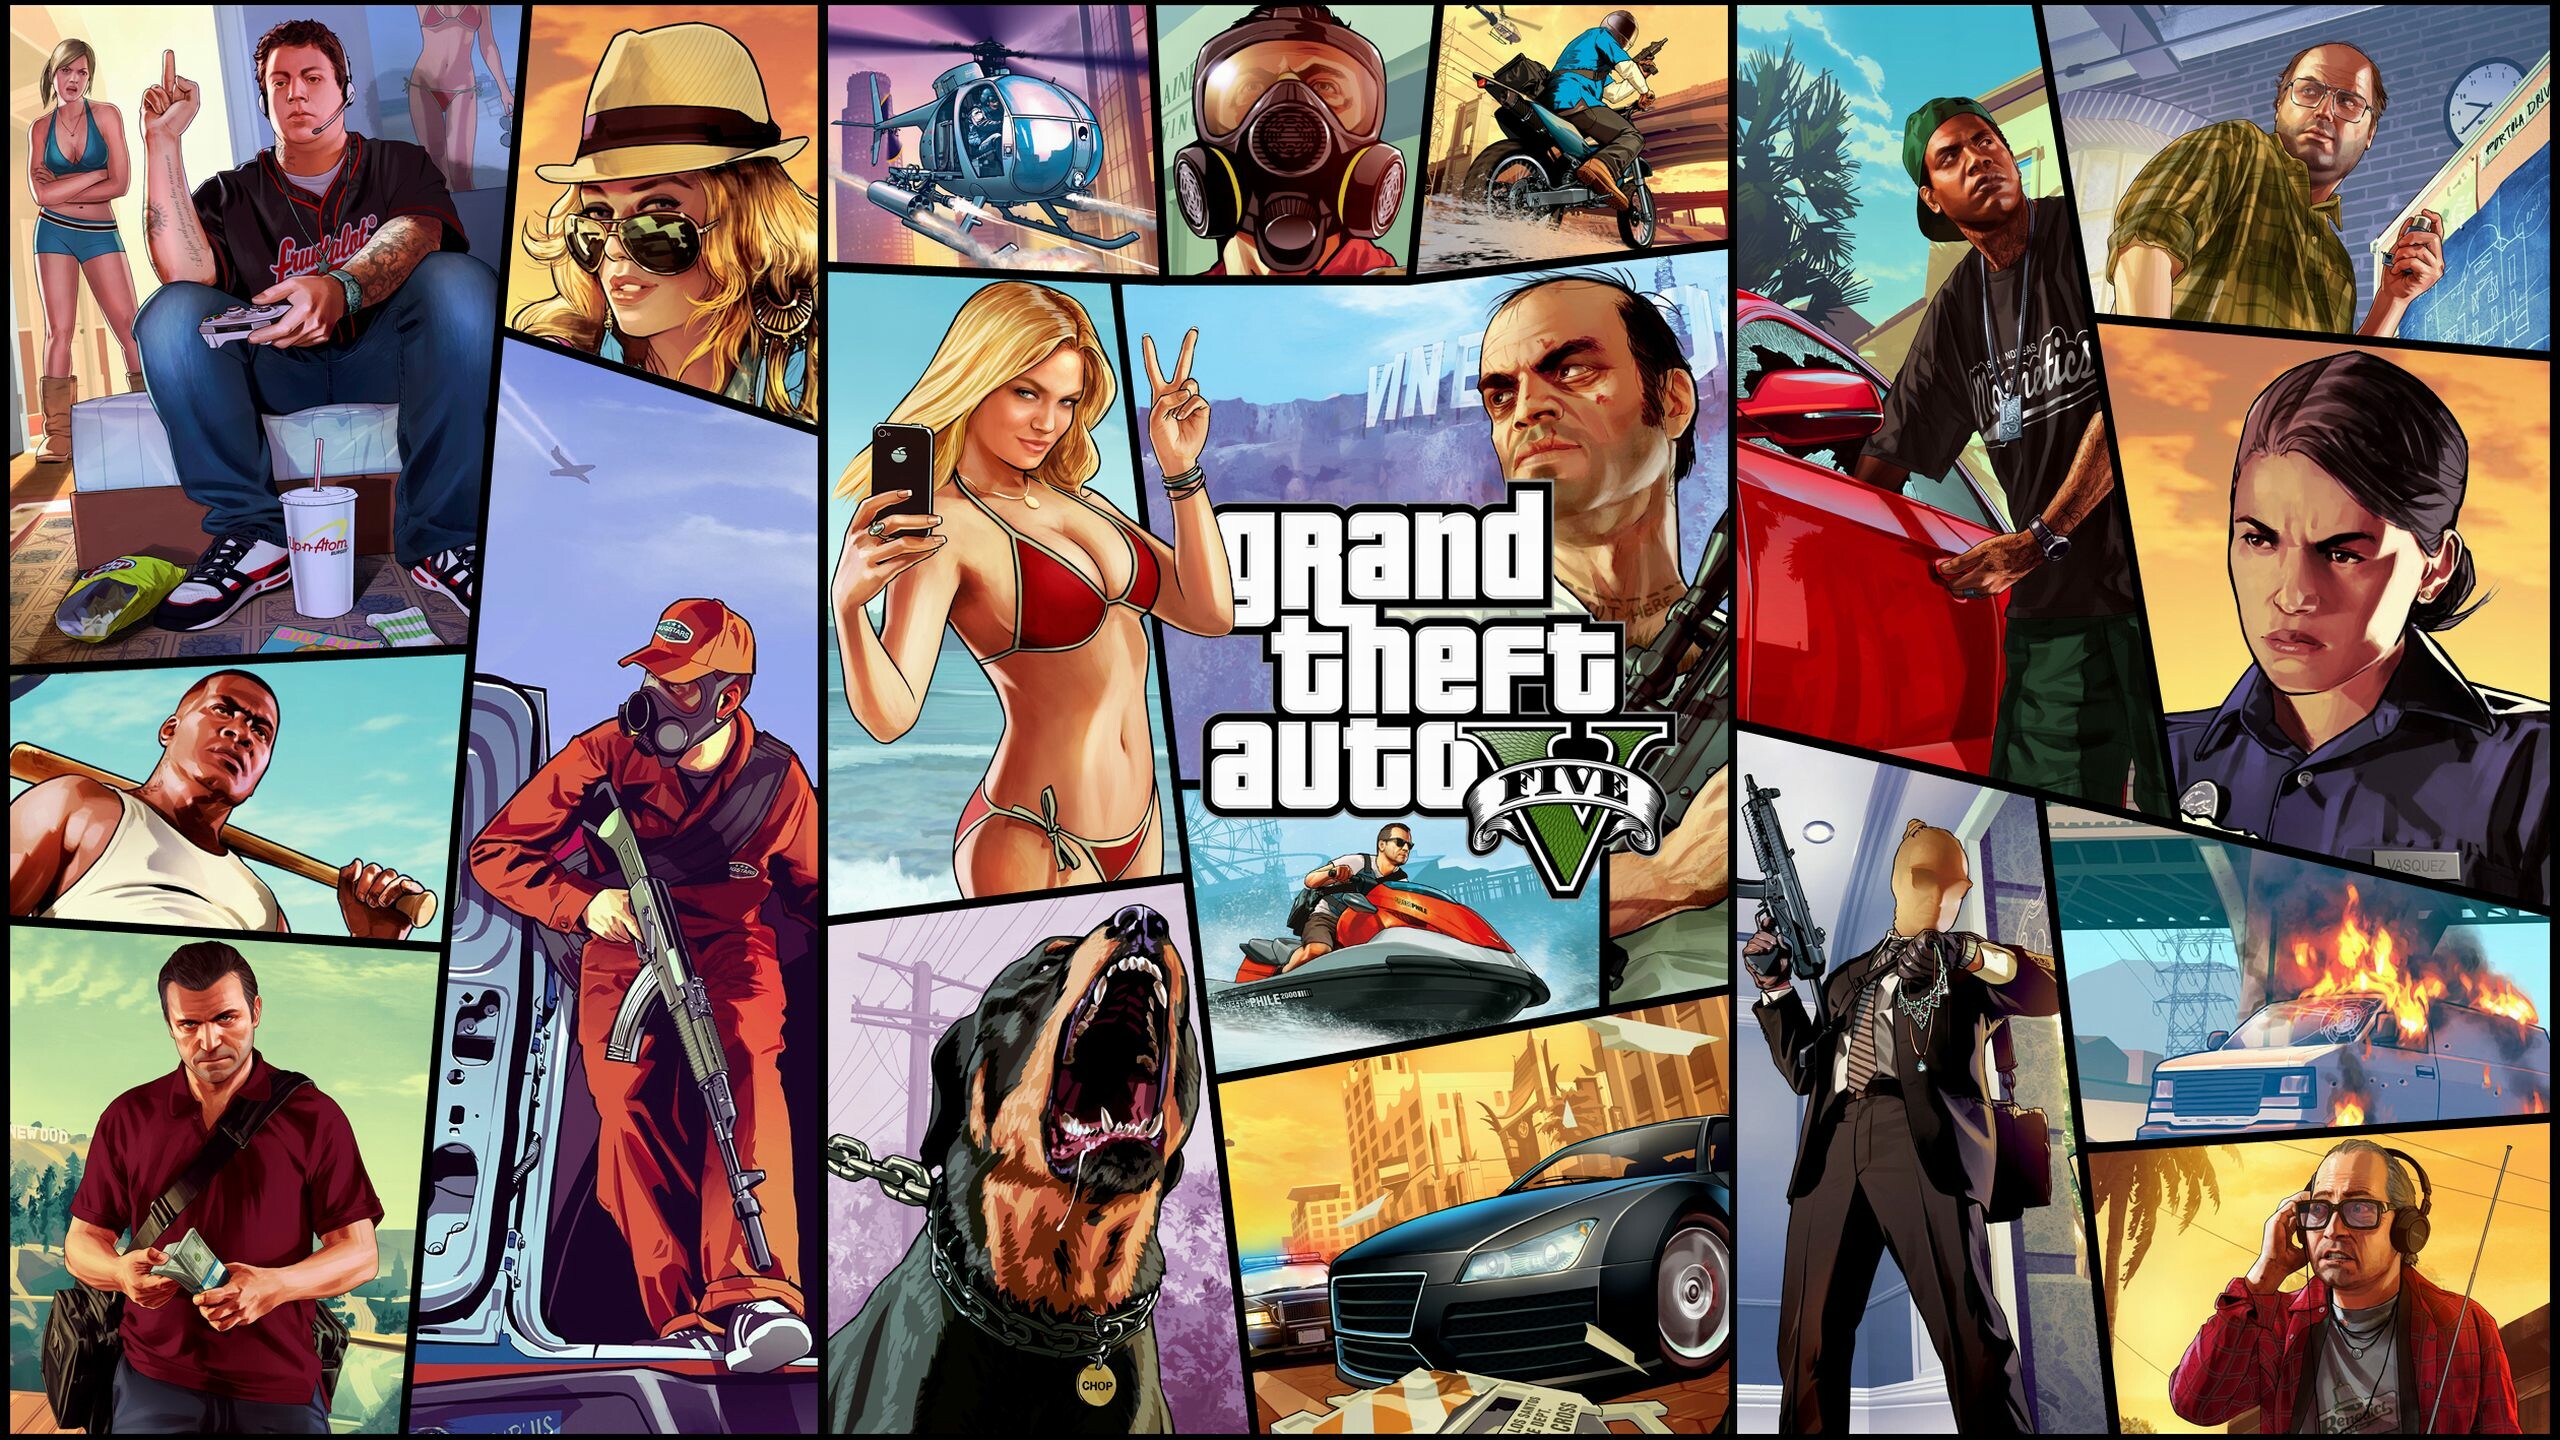 Grand Theft Auto 5: The newest addition to the infamous video game series designed by Rockstar Games. 2560x1440 HD Background.